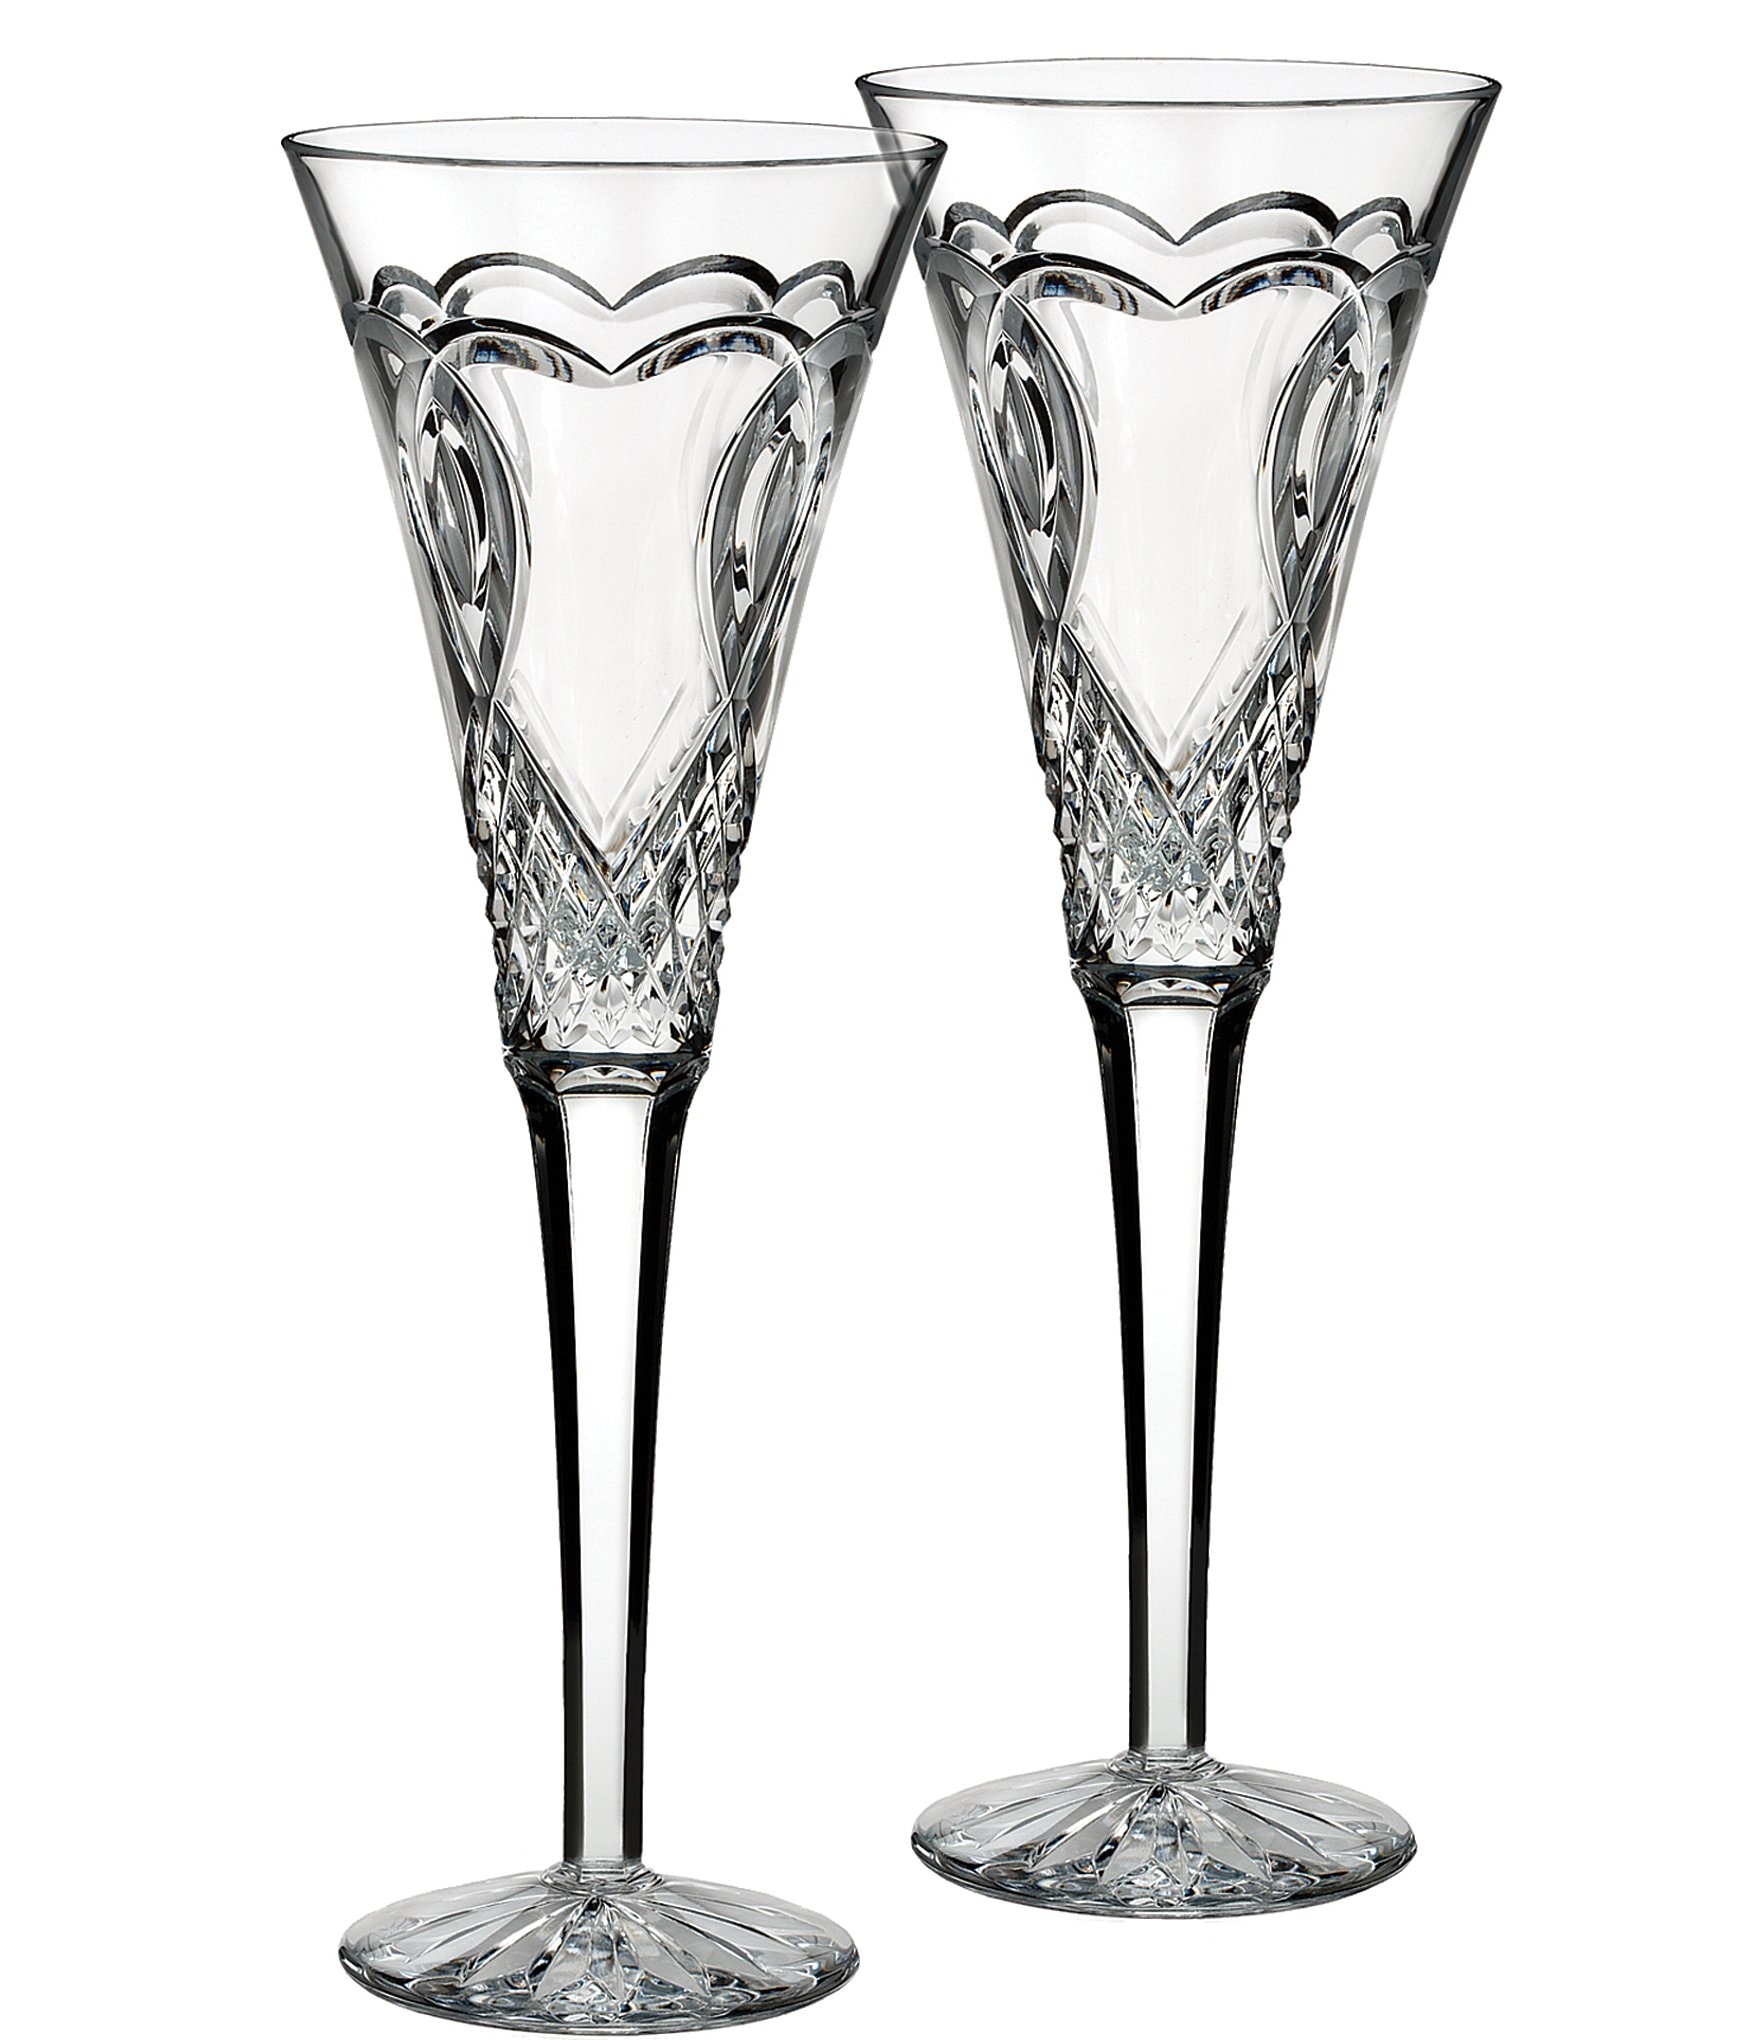 https://dimg.dillards.com/is/image/DillardsZoom/zoom/waterford-wedding-collection-heart-etched-diamond-cut-crystal-toasting-flute-pair/00000000_zi_18fd07aa-6b08-4c51-9651-9fd554823e01.jpg